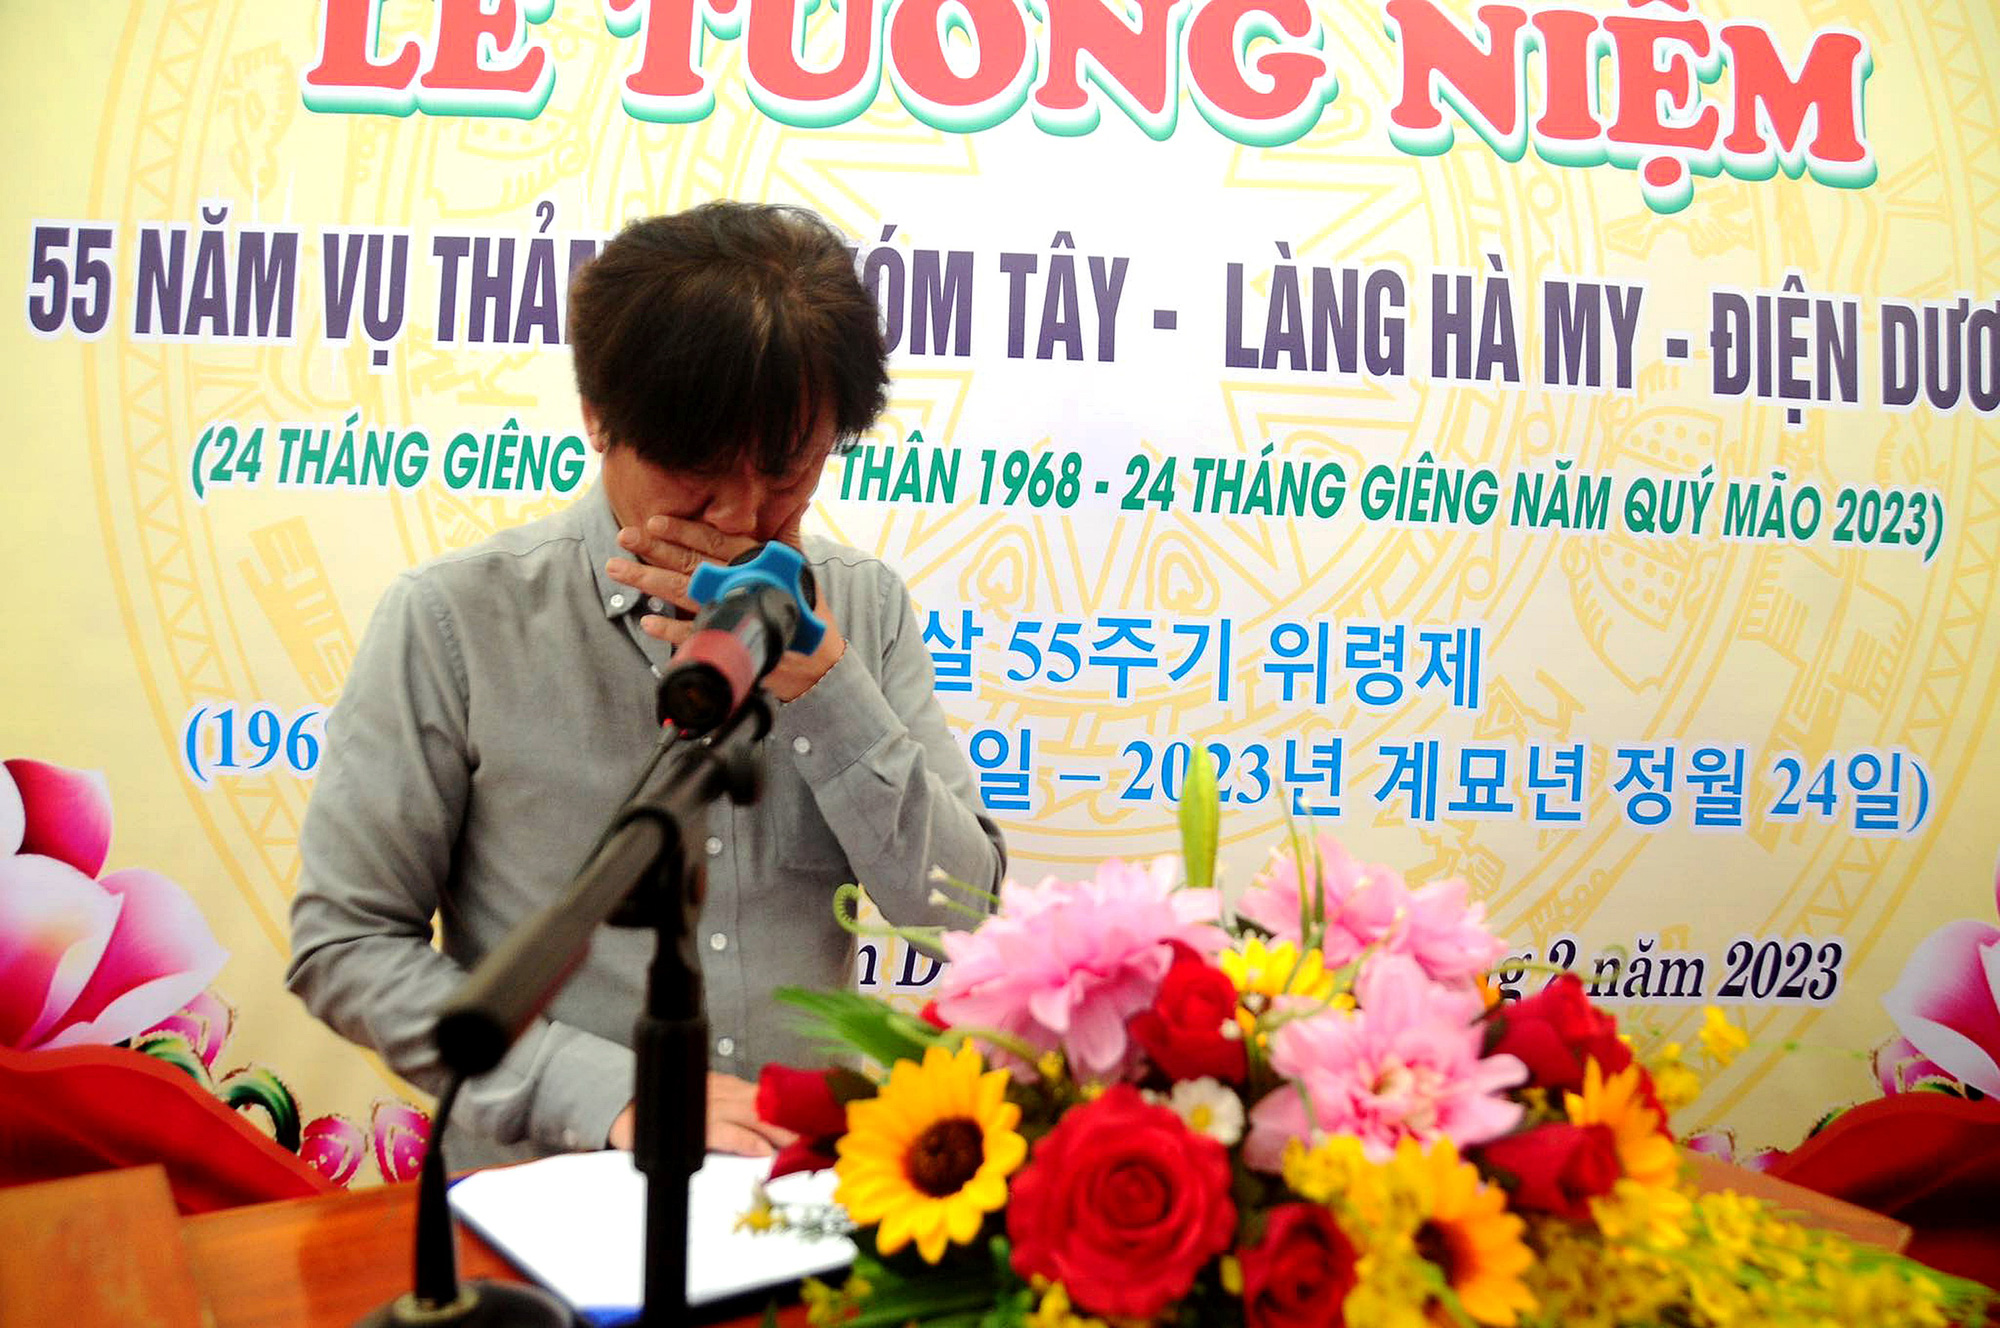 Kim Chang Sup, a member of the Korea-Vietnam Peace Foundation, burst into tears as he read a apology letter at a ceremony held to commemorate the victims of the Ha My Massacre. Photo: B.D. / Tuoi Tre